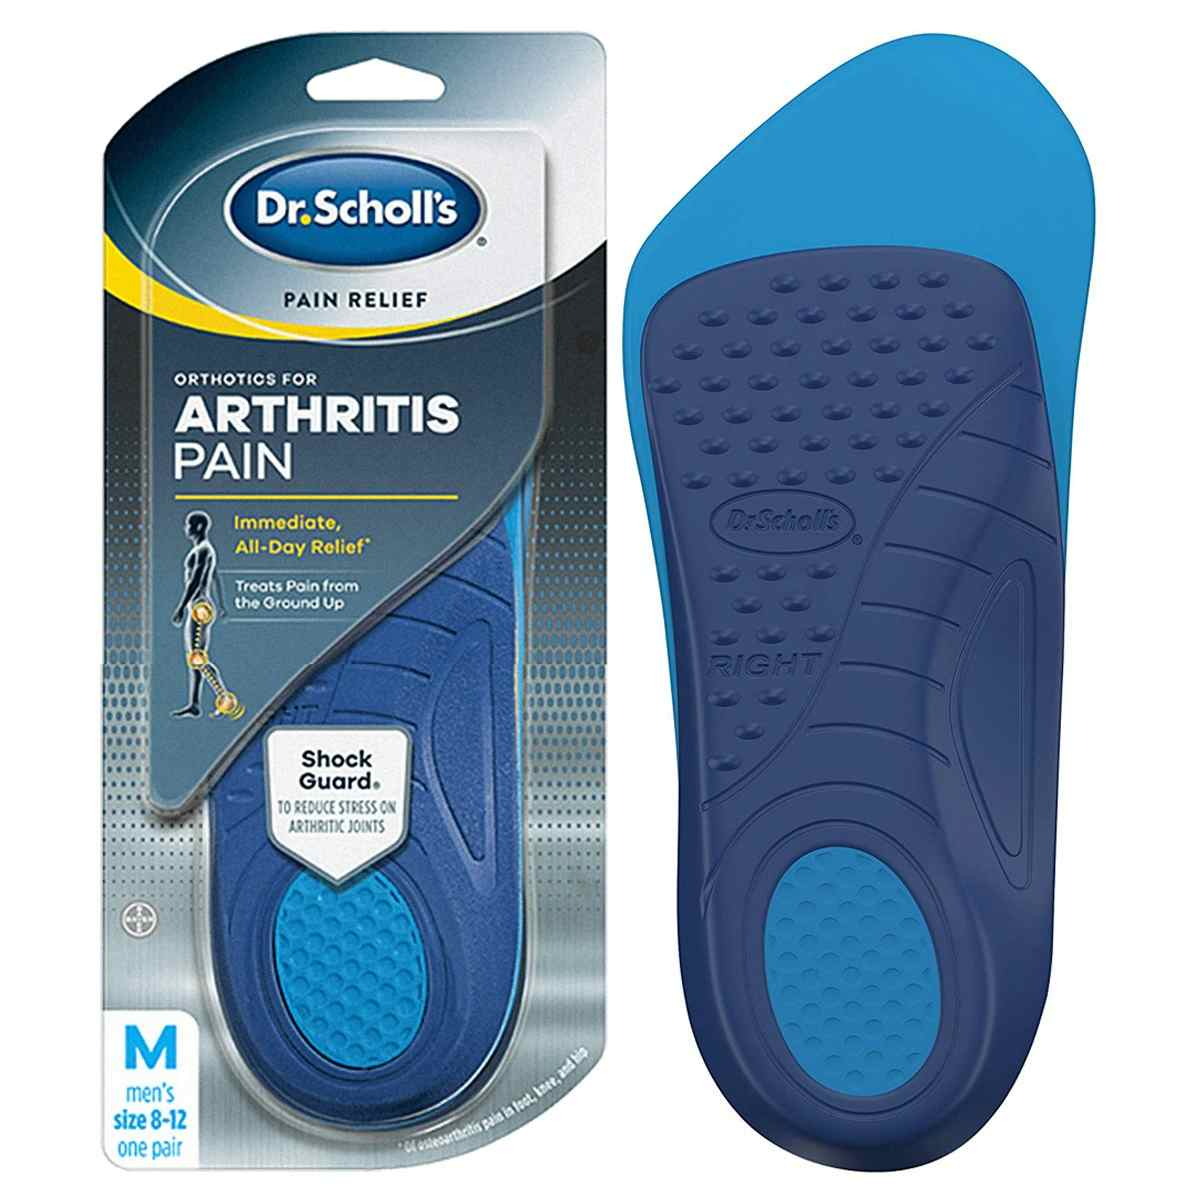 Dr. Scholl's Pain Relief Orthotics for Arthritis Pain, 85284673, Men's (Size 8-12) - Pack of 2